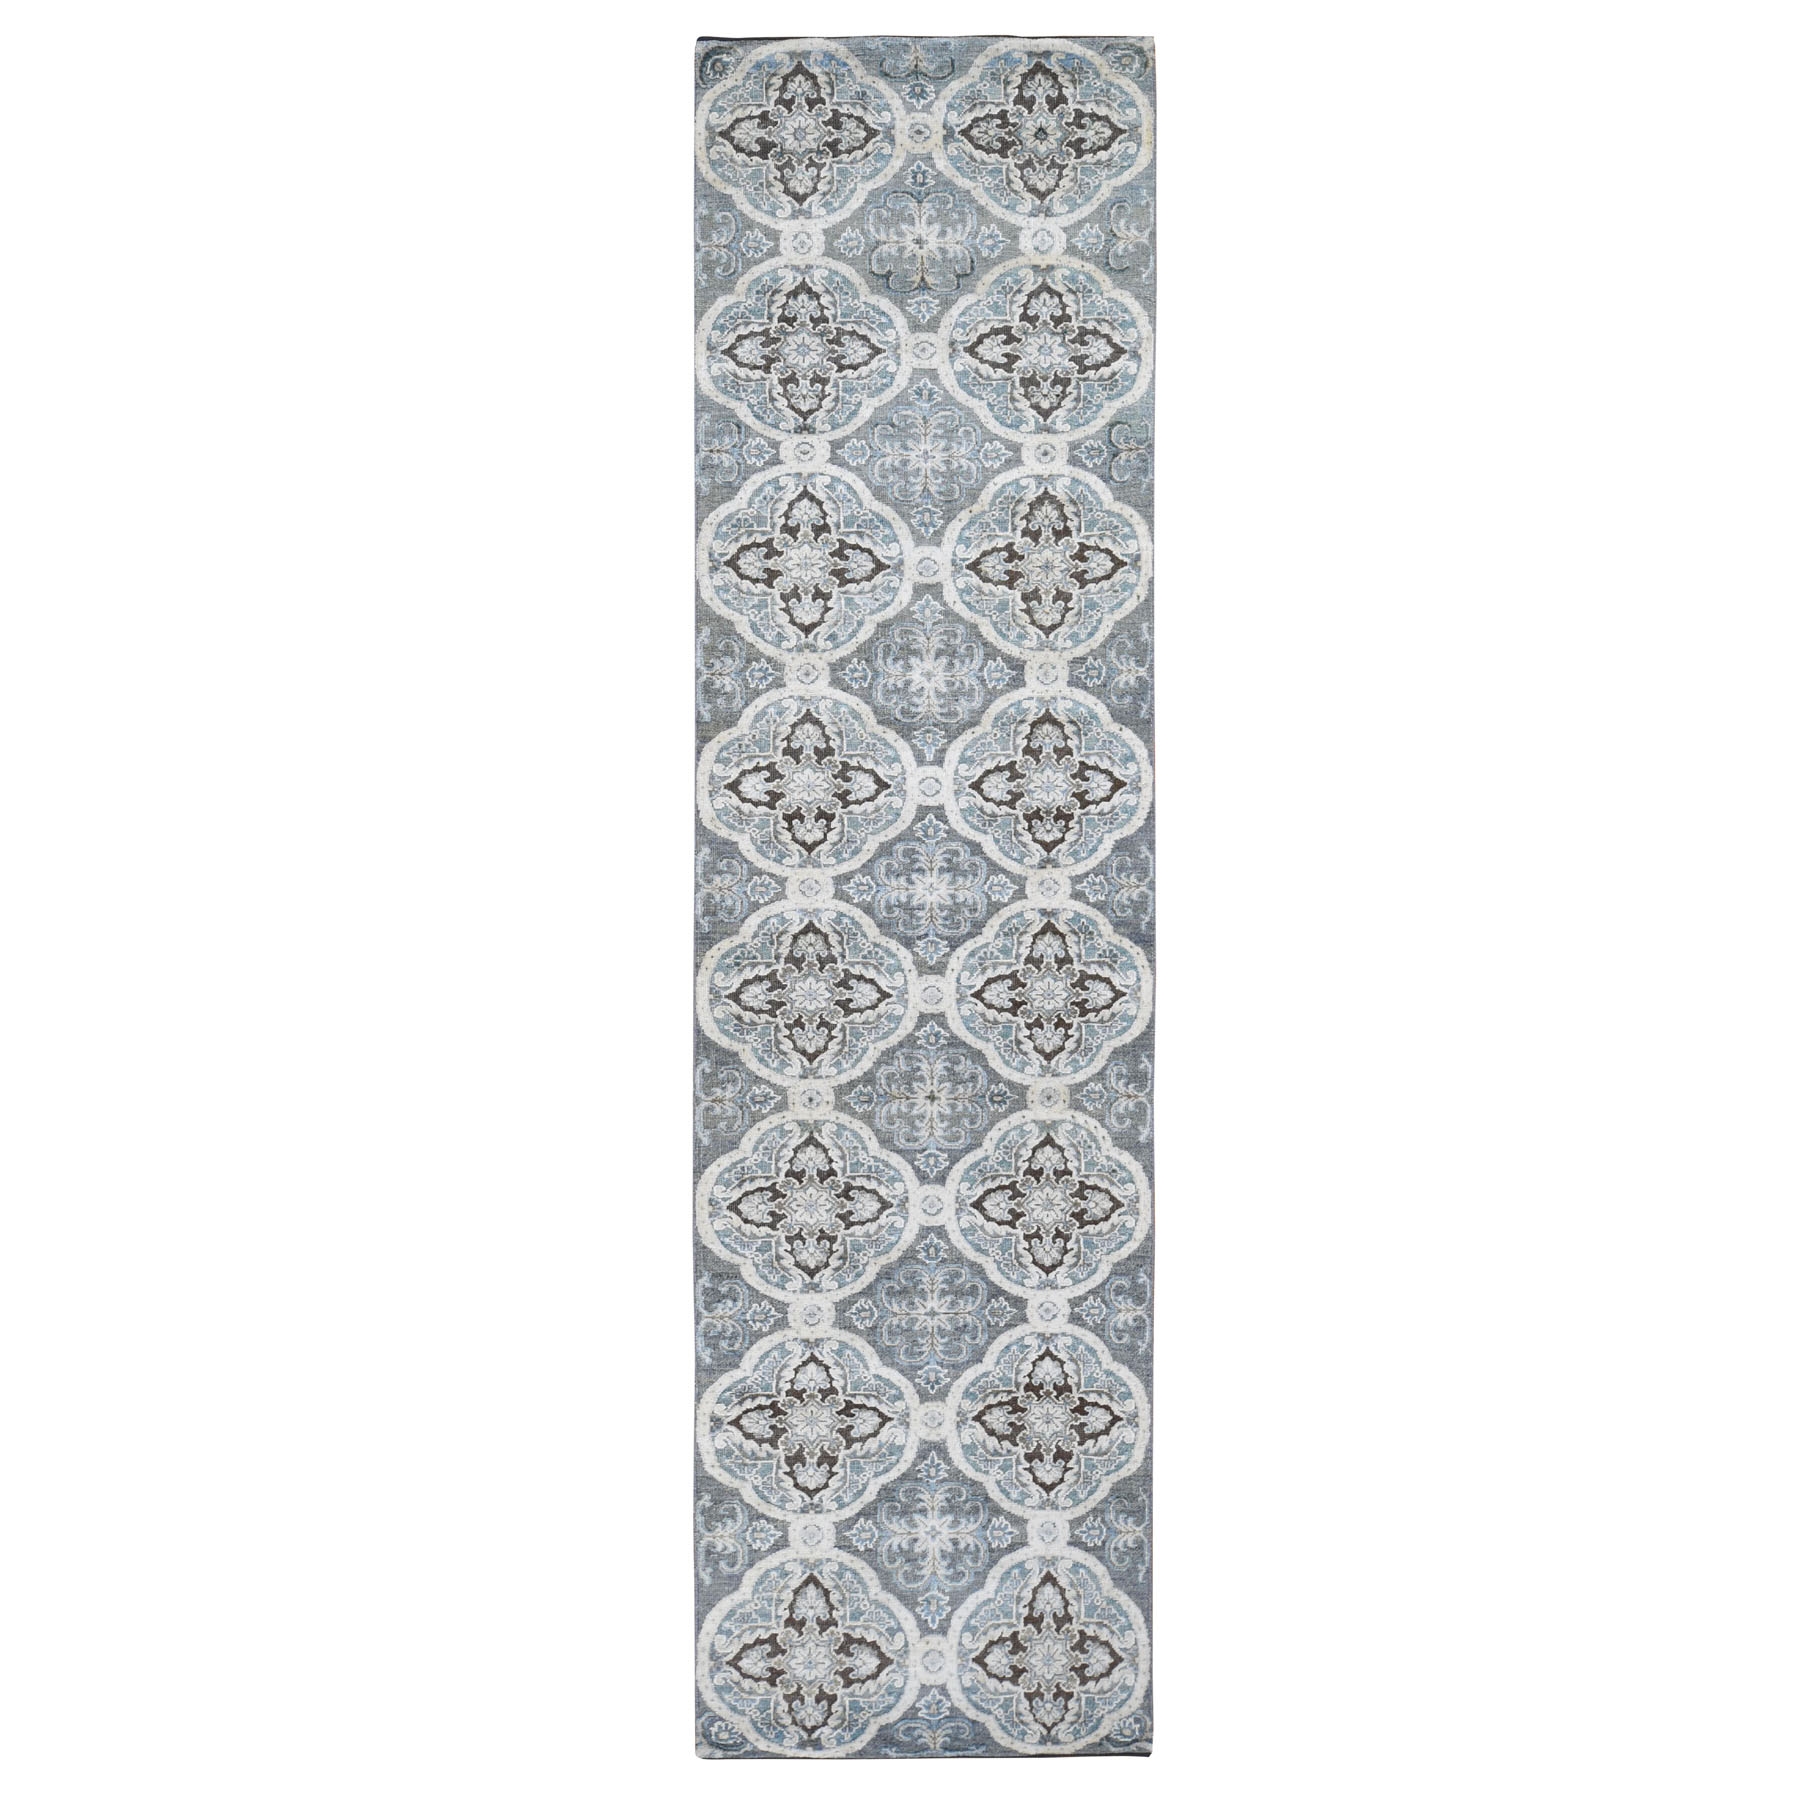 2'7"x9'10" Gray Silk With Textured Wool Repetitive Design Hand Woven Runner Oriental Rug 